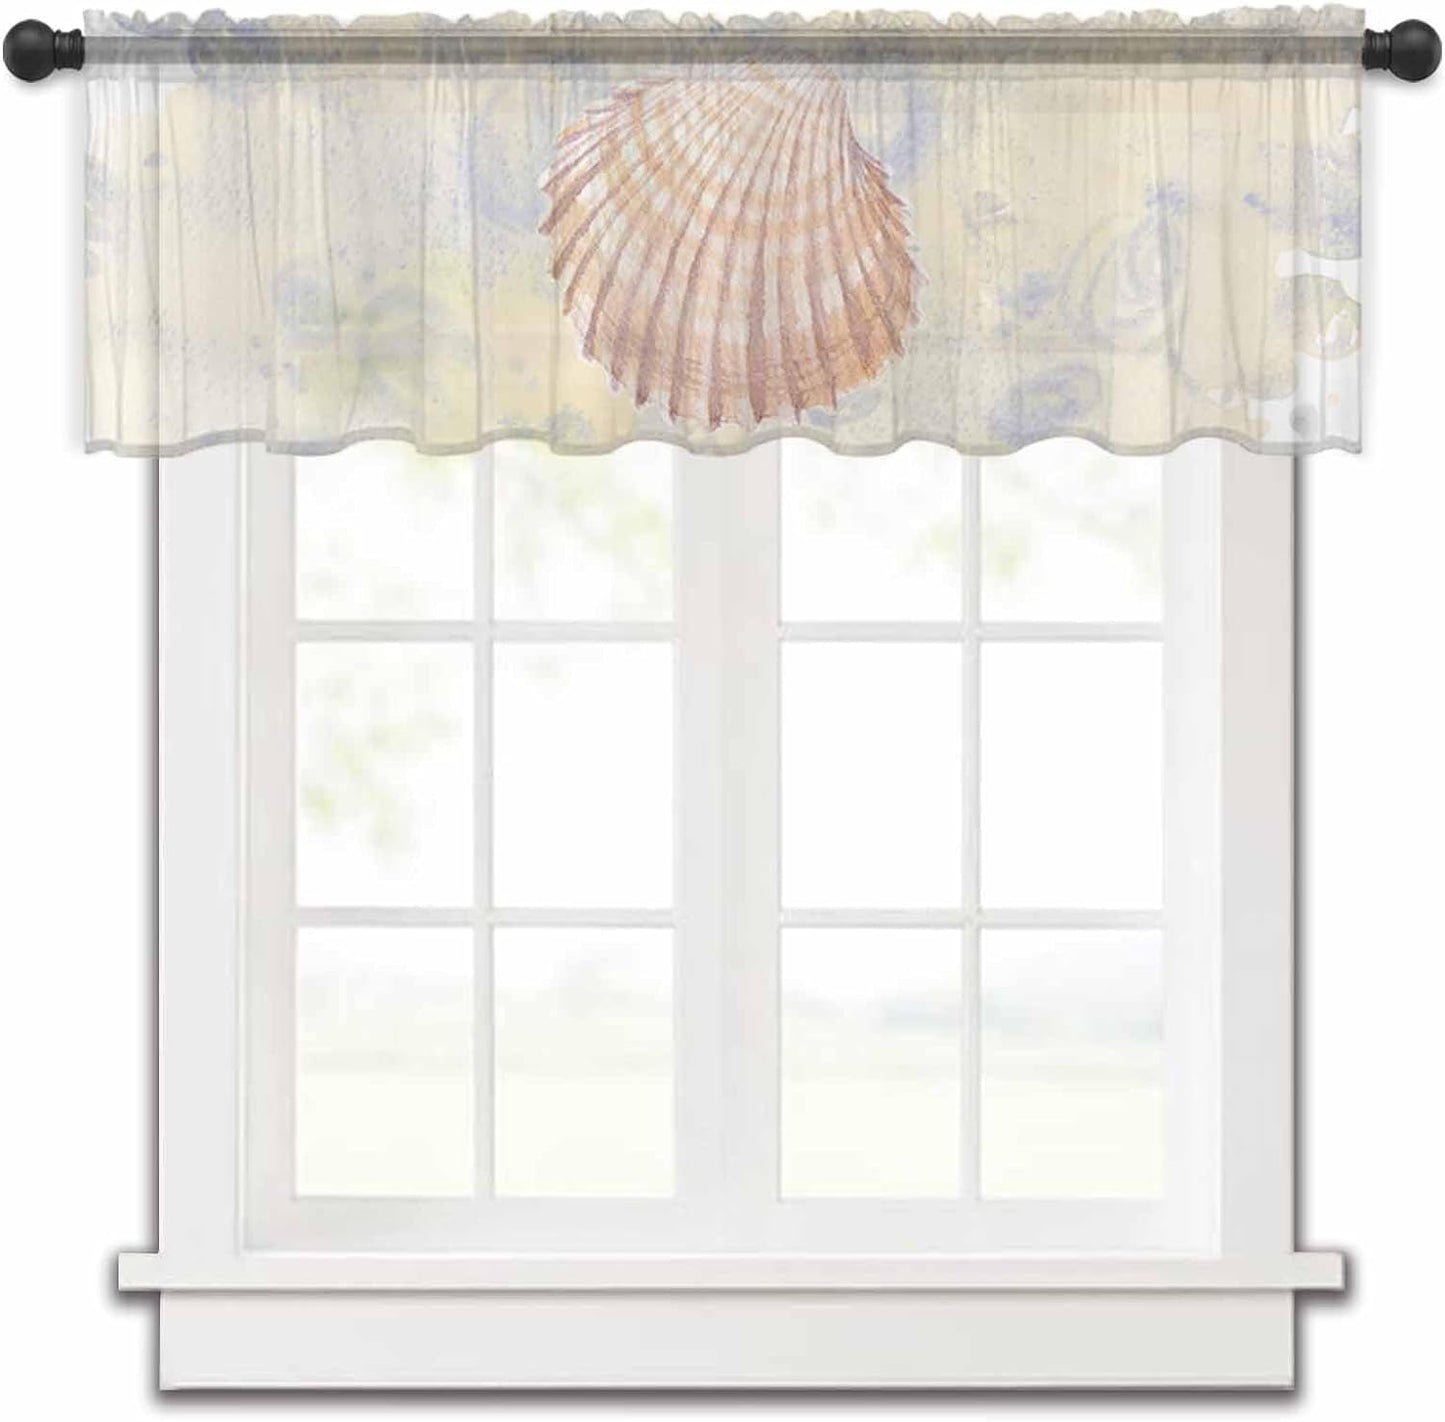 Watercolor Shell Valance Curtains for Kitchen/Living Room/Bathroom/Bedroom Window,Rod Pocket Topper Half Short Window Curtains Voile Sheer Scarf,Ocean Sea Watercolor Summer Beach Nautical 54"X18"